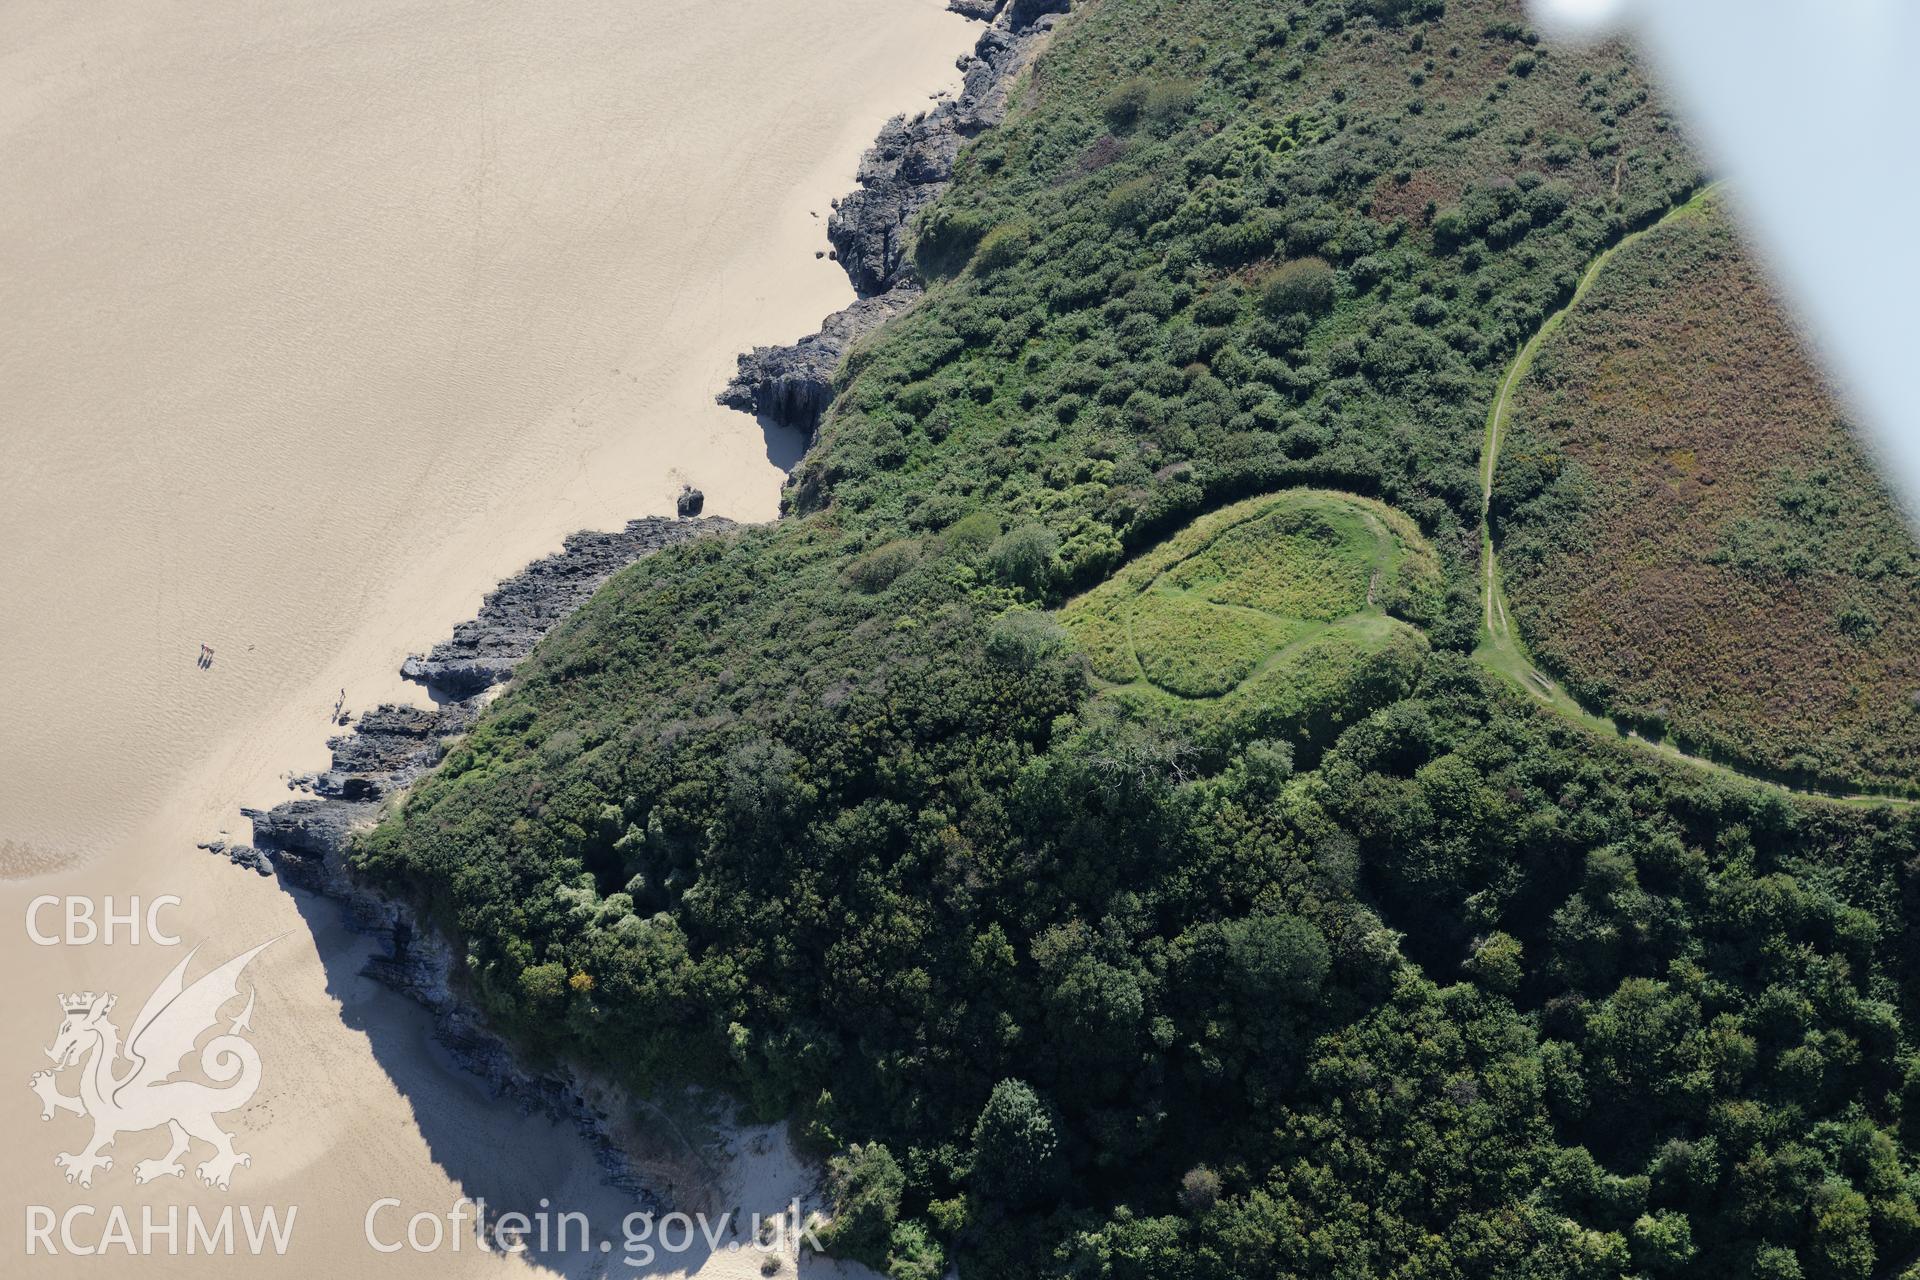 Castle Tower at Three Cliffs Bay, on the southern coast of the Gower Peninsula. Oblique aerial photograph taken during the Royal Commission's programme of archaeological aerial reconnaissance by Toby Driver on 30th September 2015.